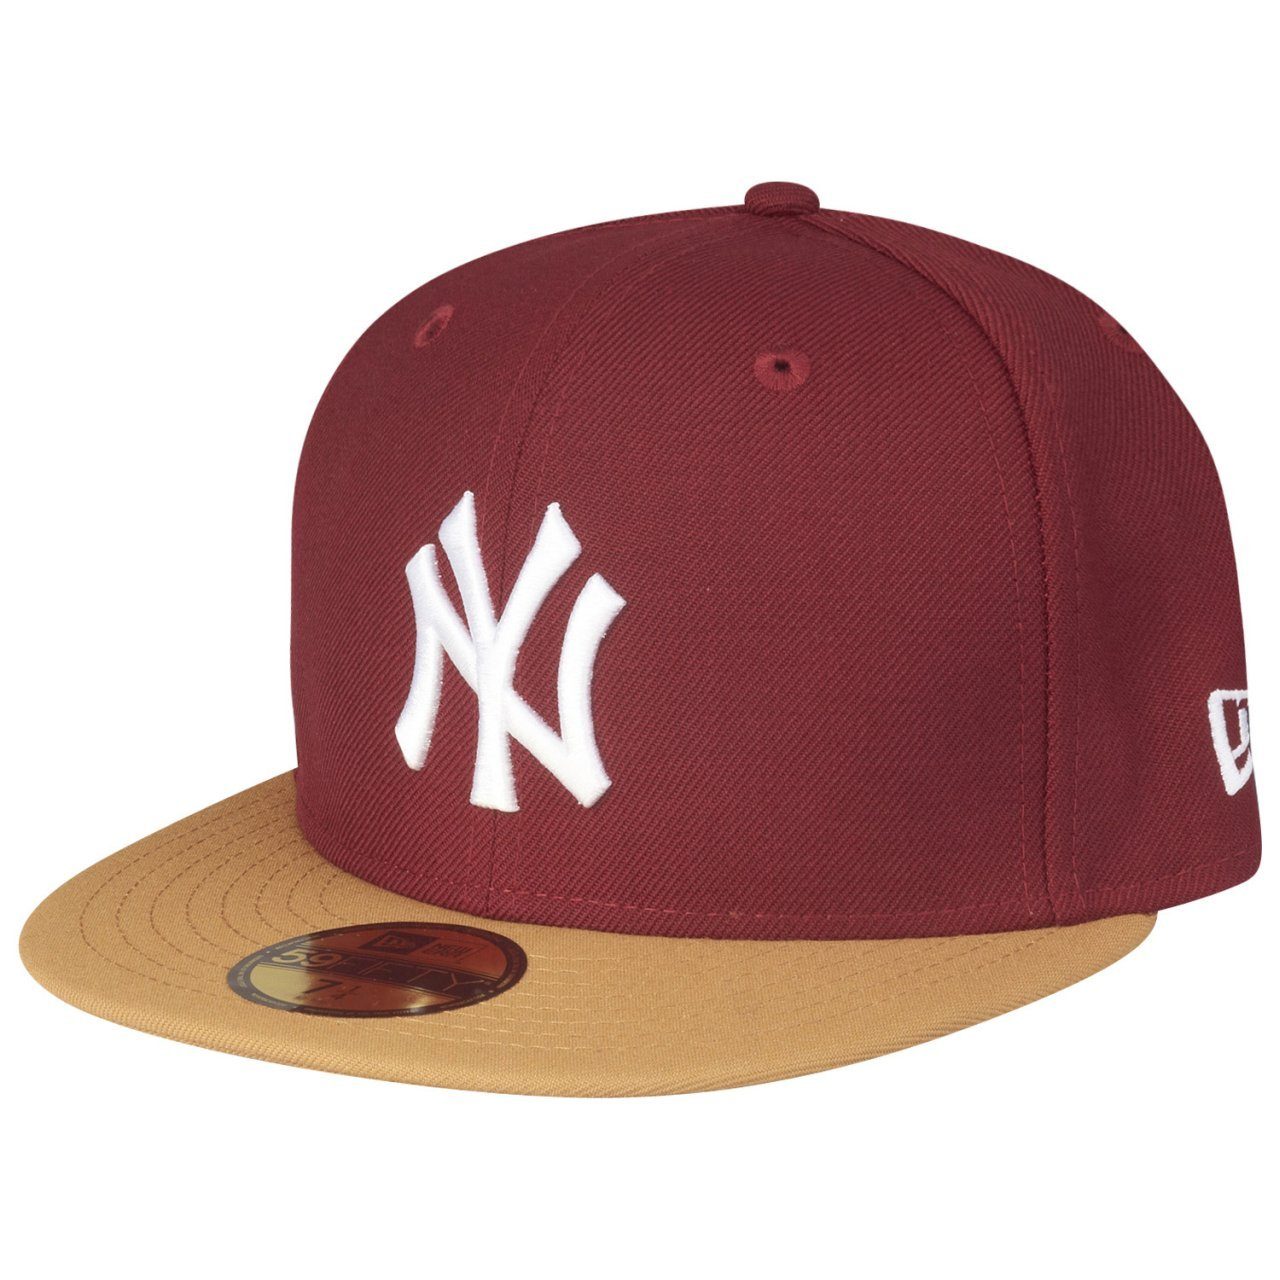 New Era Fitted Cap 59Fifty MLB New York Yankees cardinal